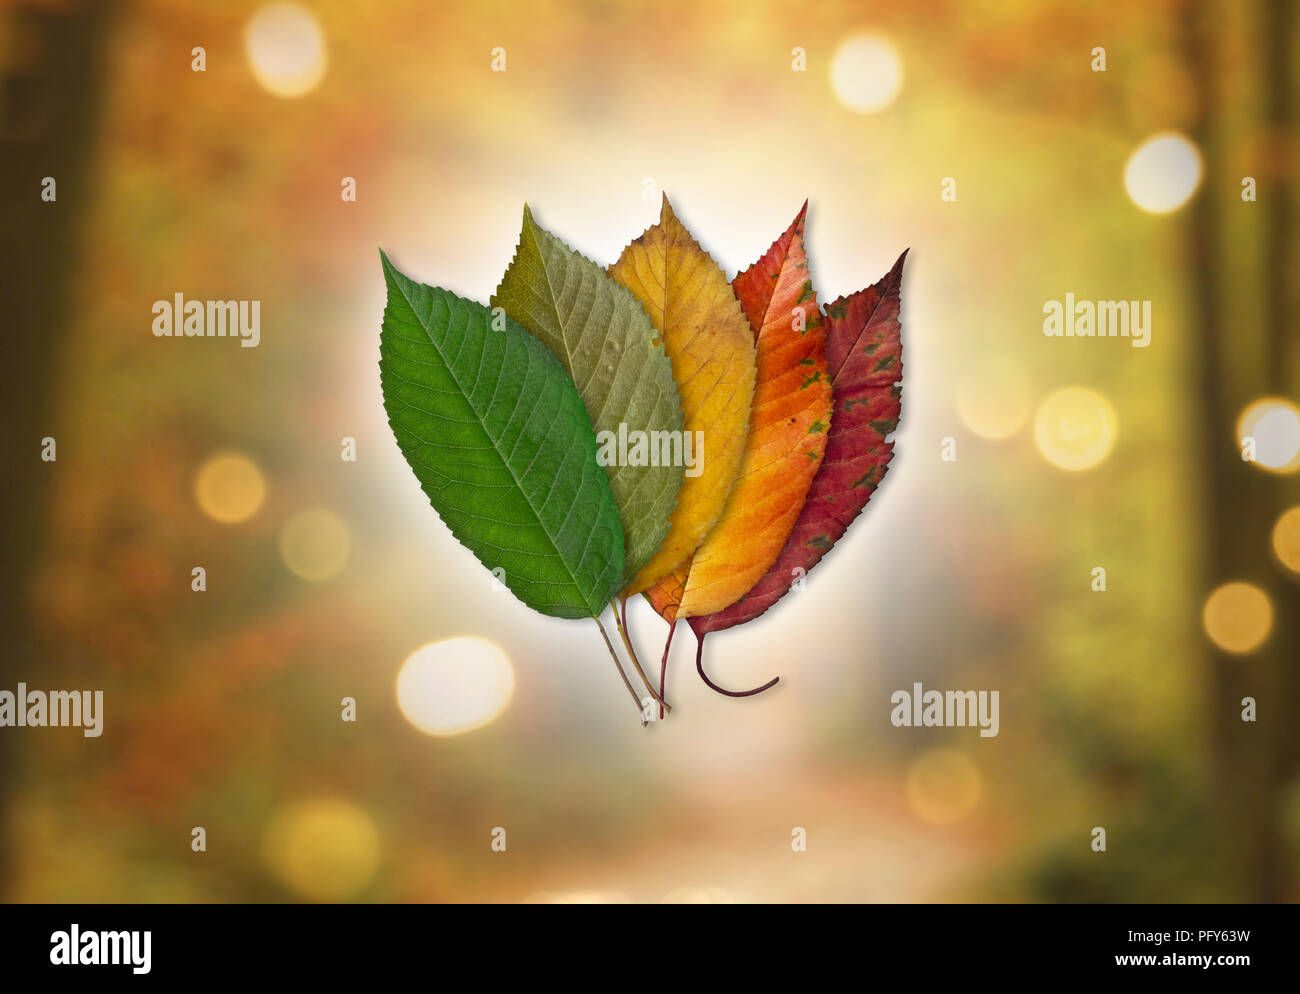 Colors of Autumn - Colored Leaves on Bokeh Background Stock Photo